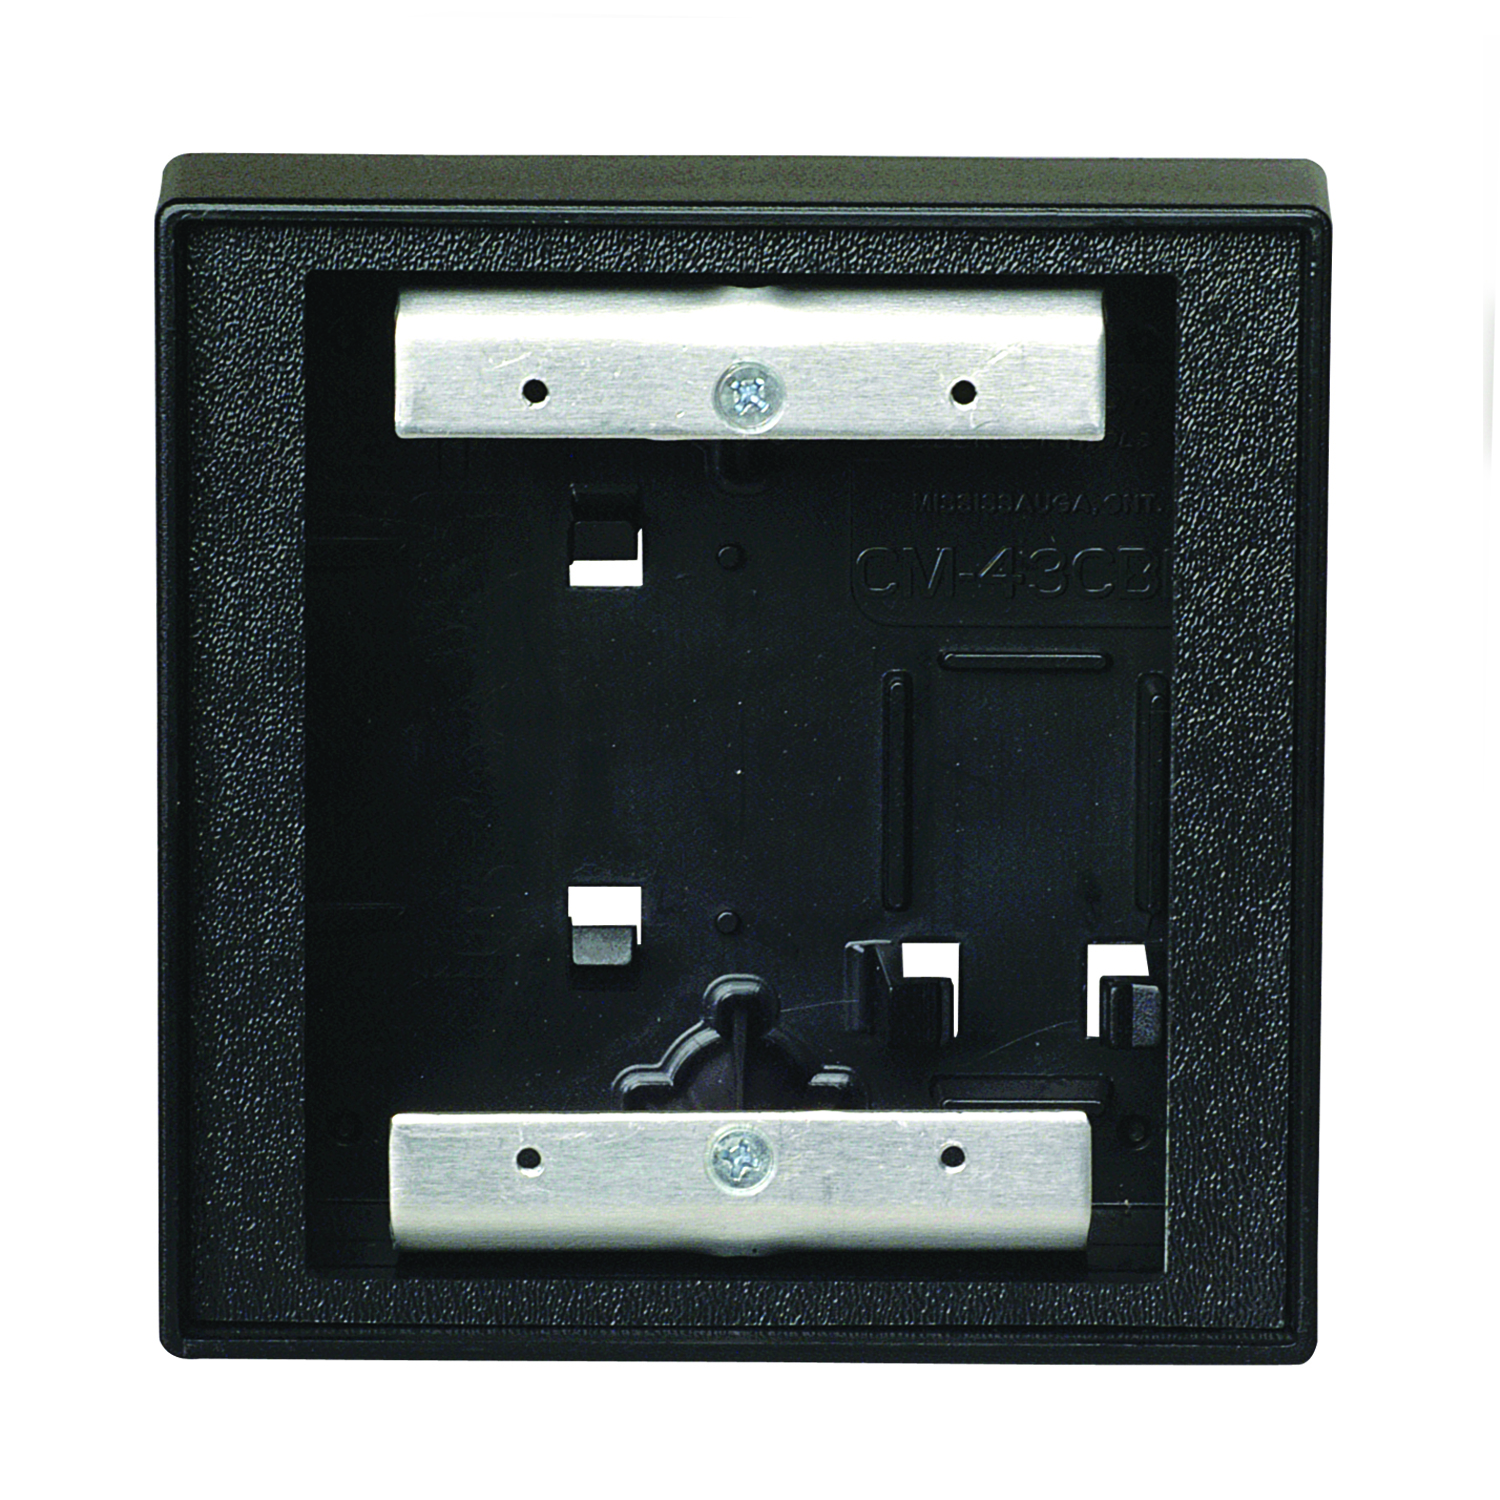 CM-25, CM-26CB & CM-35 Series: Narrow Push Plate Switches - All Active Switches - Activation